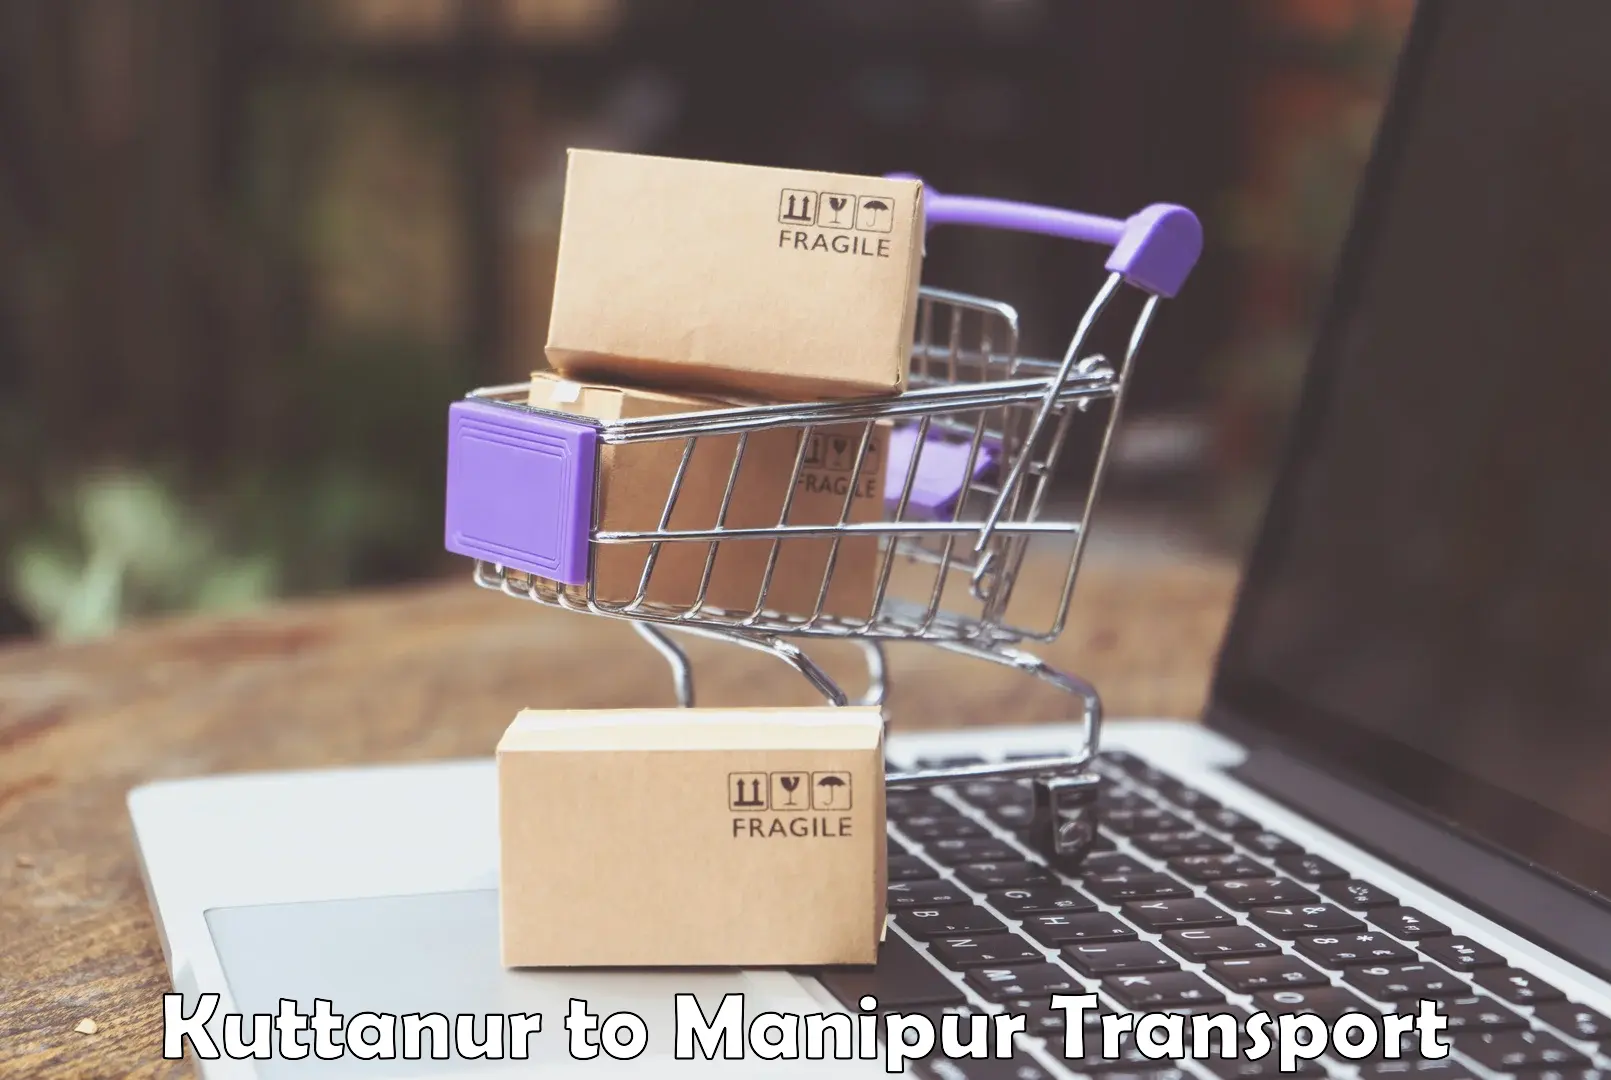 Transportation services in Kuttanur to Manipur